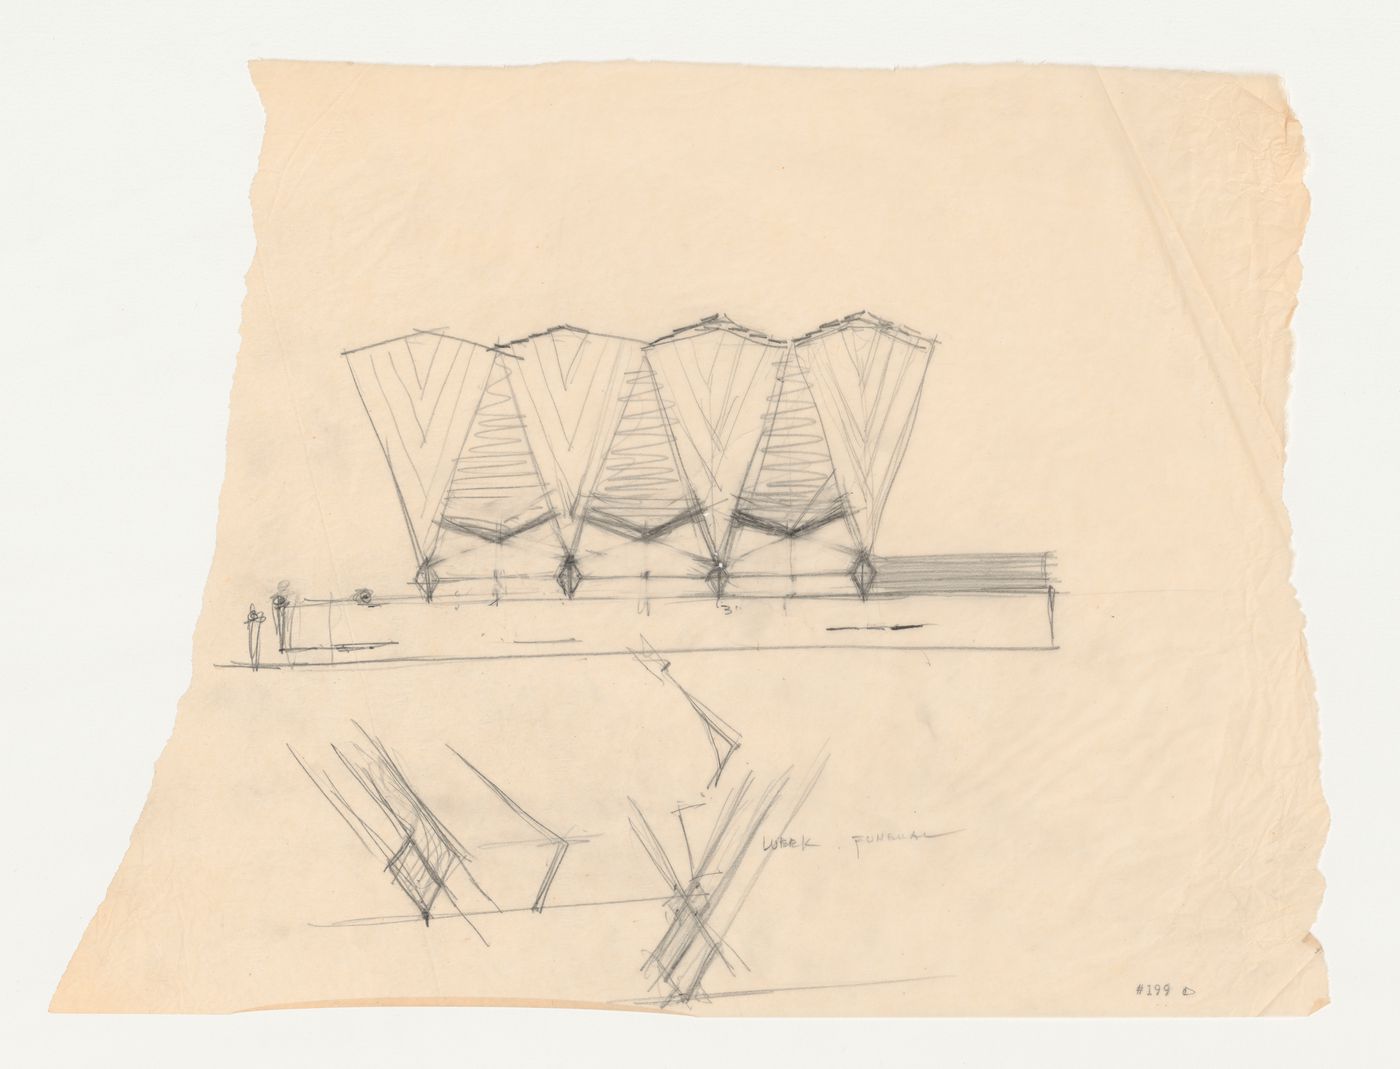 Sketch elevation and details for a chapel roof canopy based on the Wayfarers' Chapel design